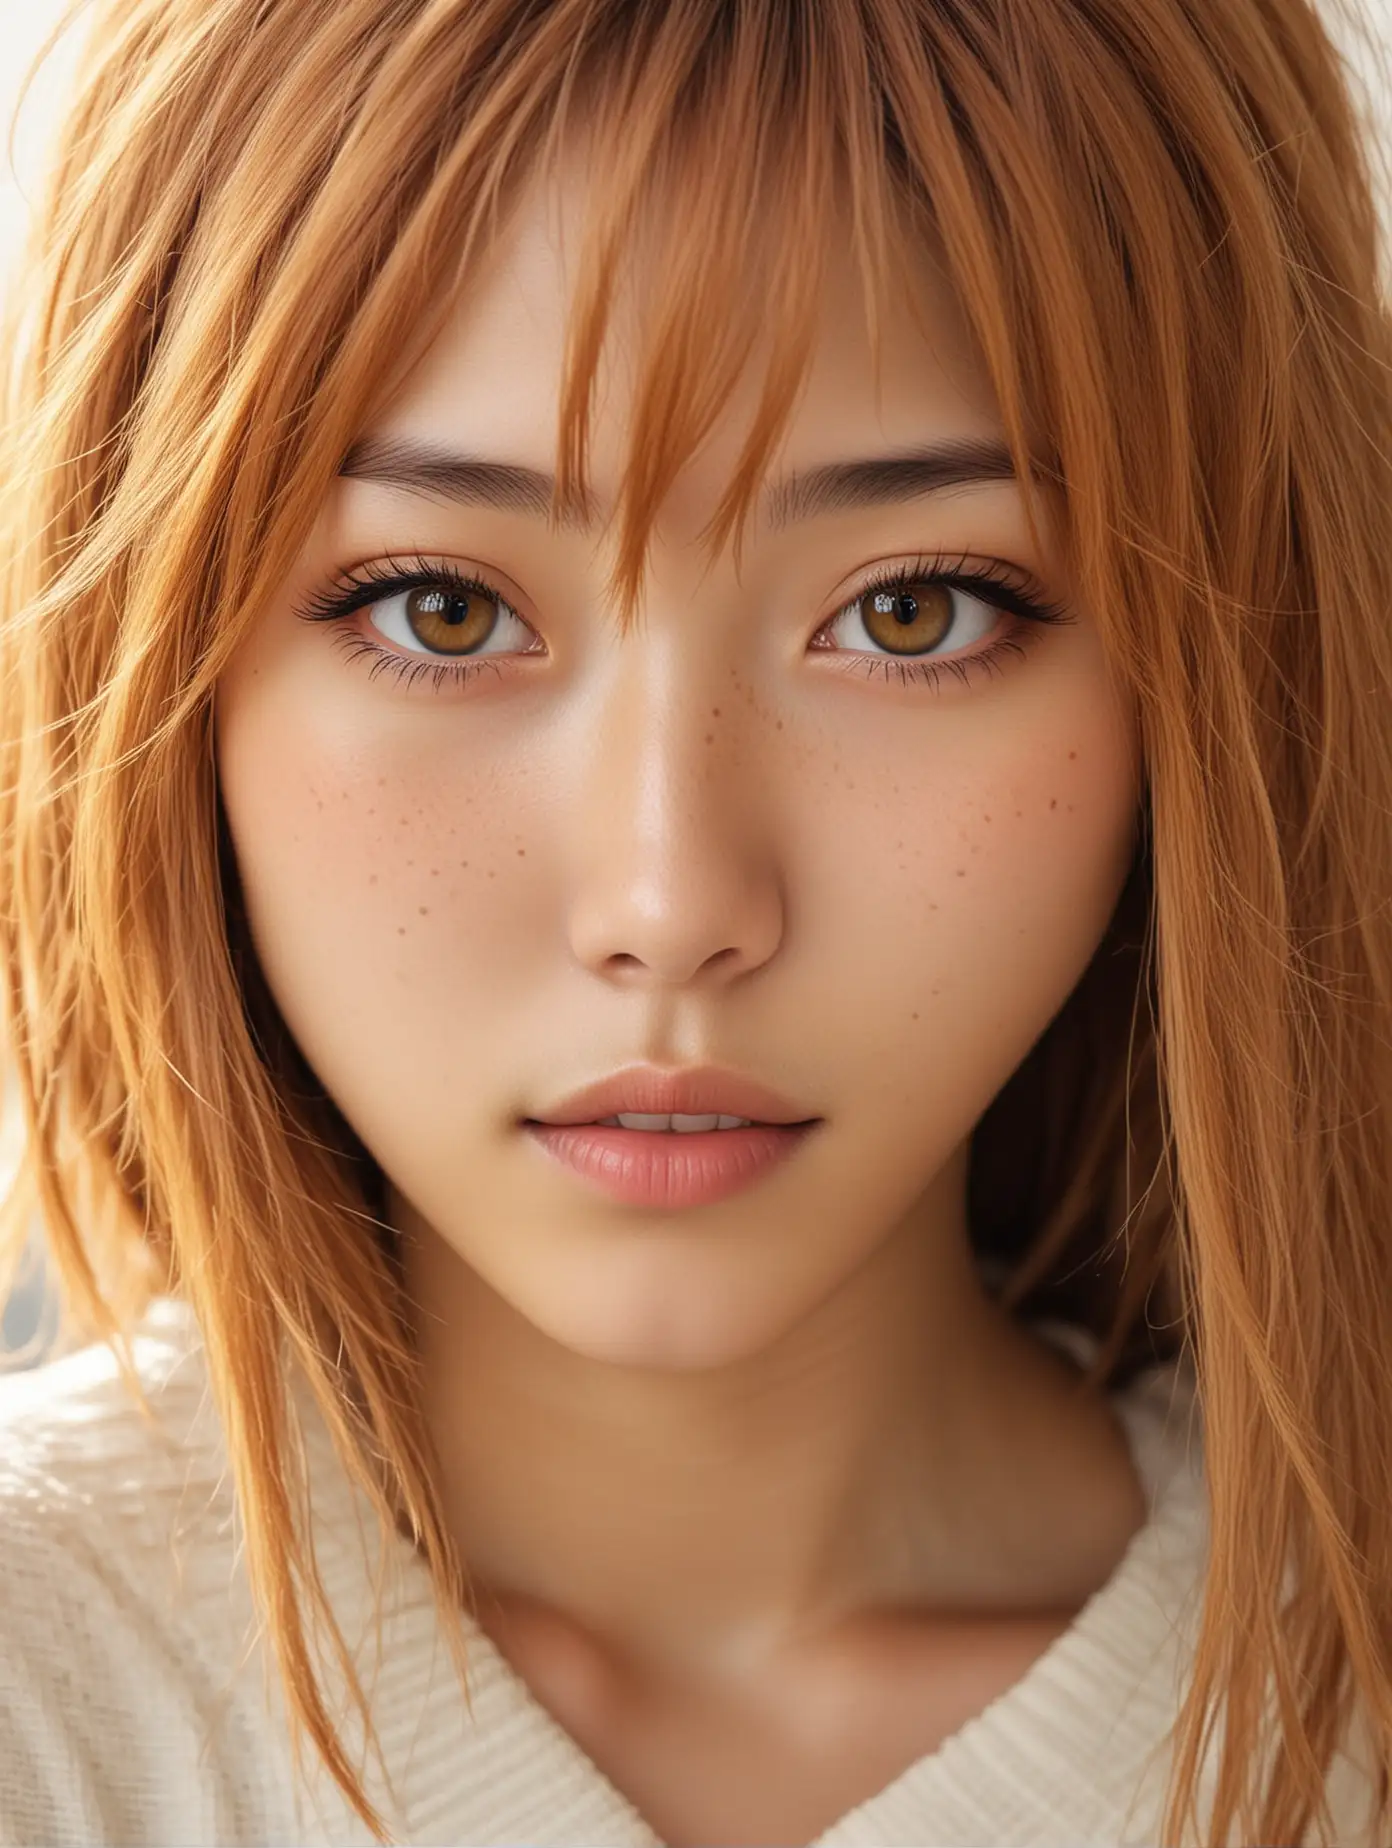 Japanese girl with very light skin and caramel-colored hair and medium length hair. She has freckles covering her nose and huge amber eyes.